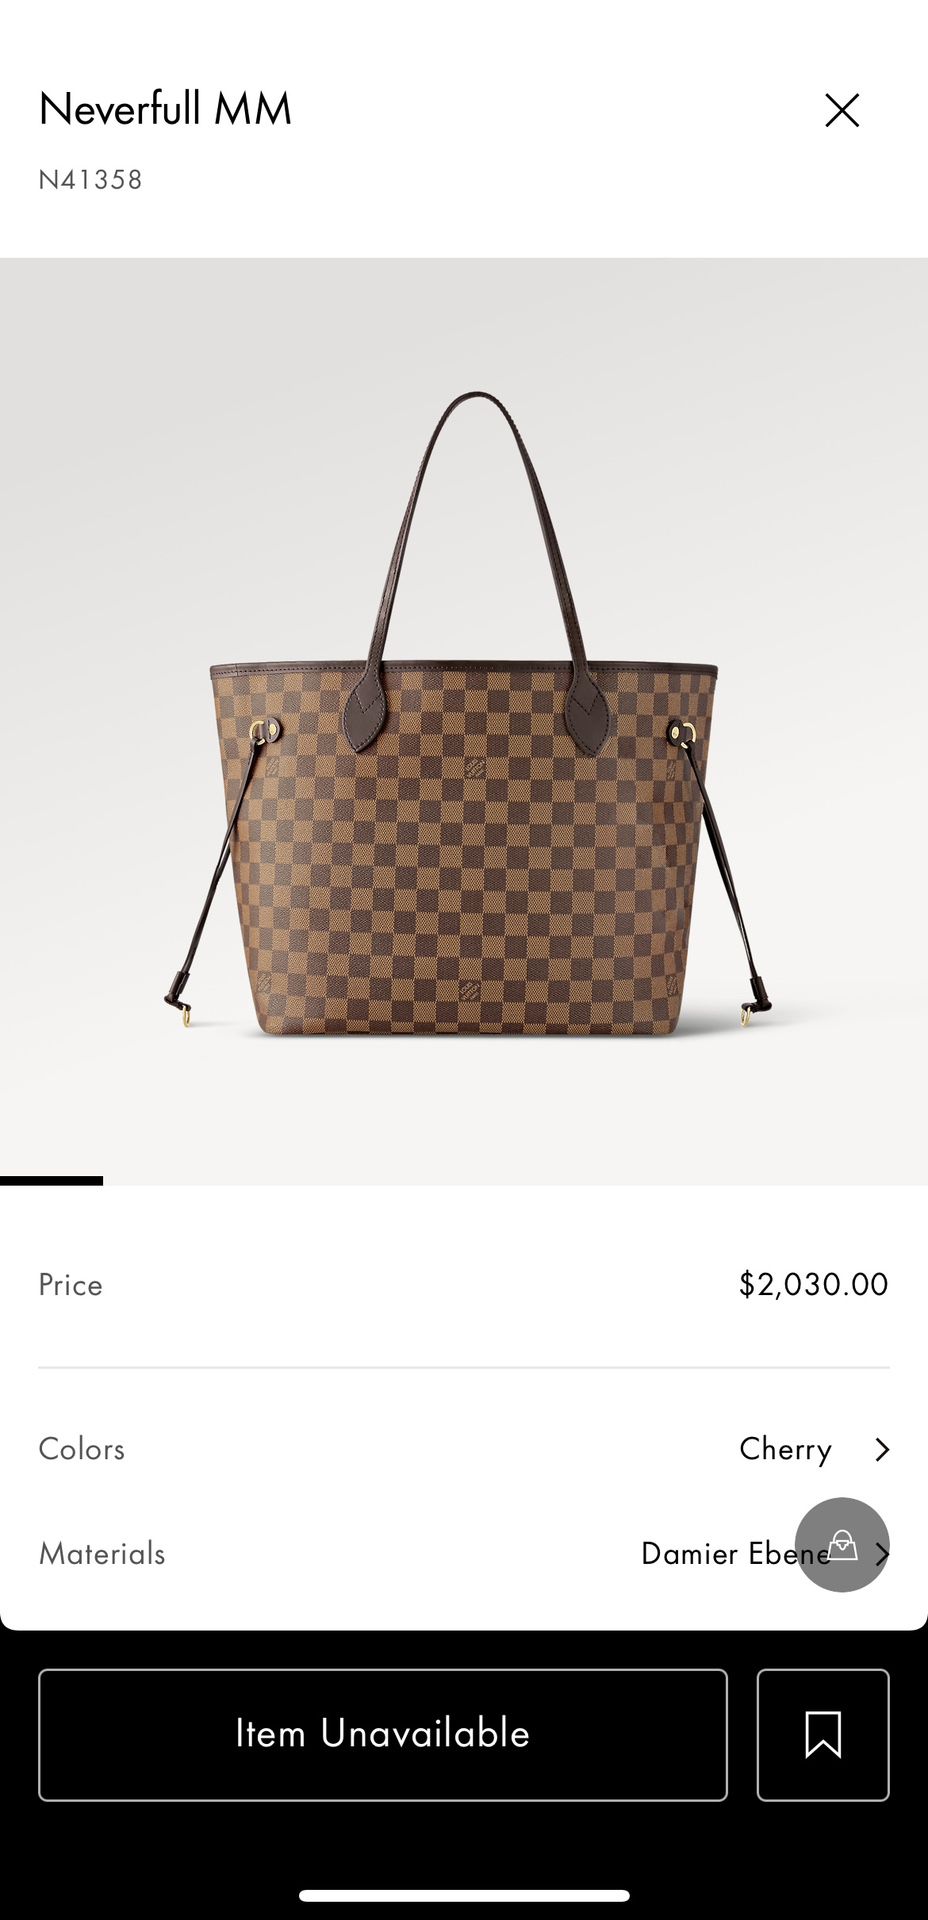 This item is unavailable -   Louis vuitton handbags neverfull, Louis  vuitton handbags, Louis vuitton